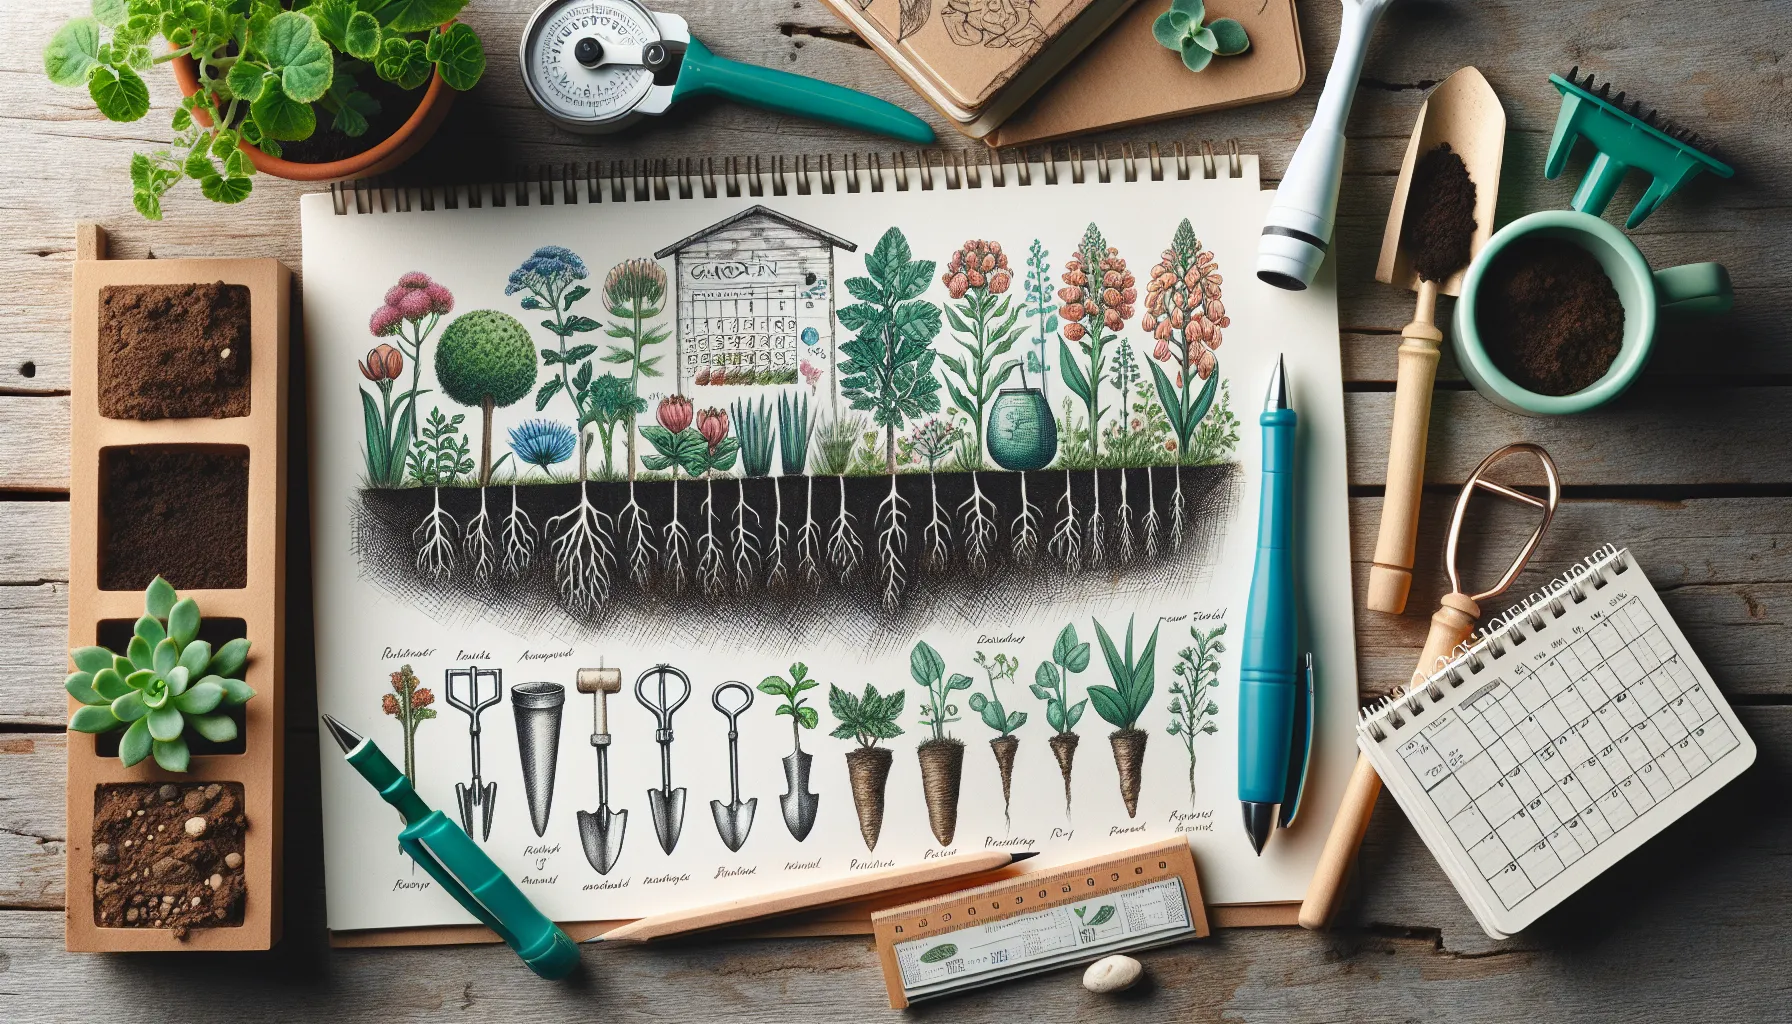 A detailed garden planning guide sketch flanked by gardening tools, seedlings, and a calendar on a wooden surface.